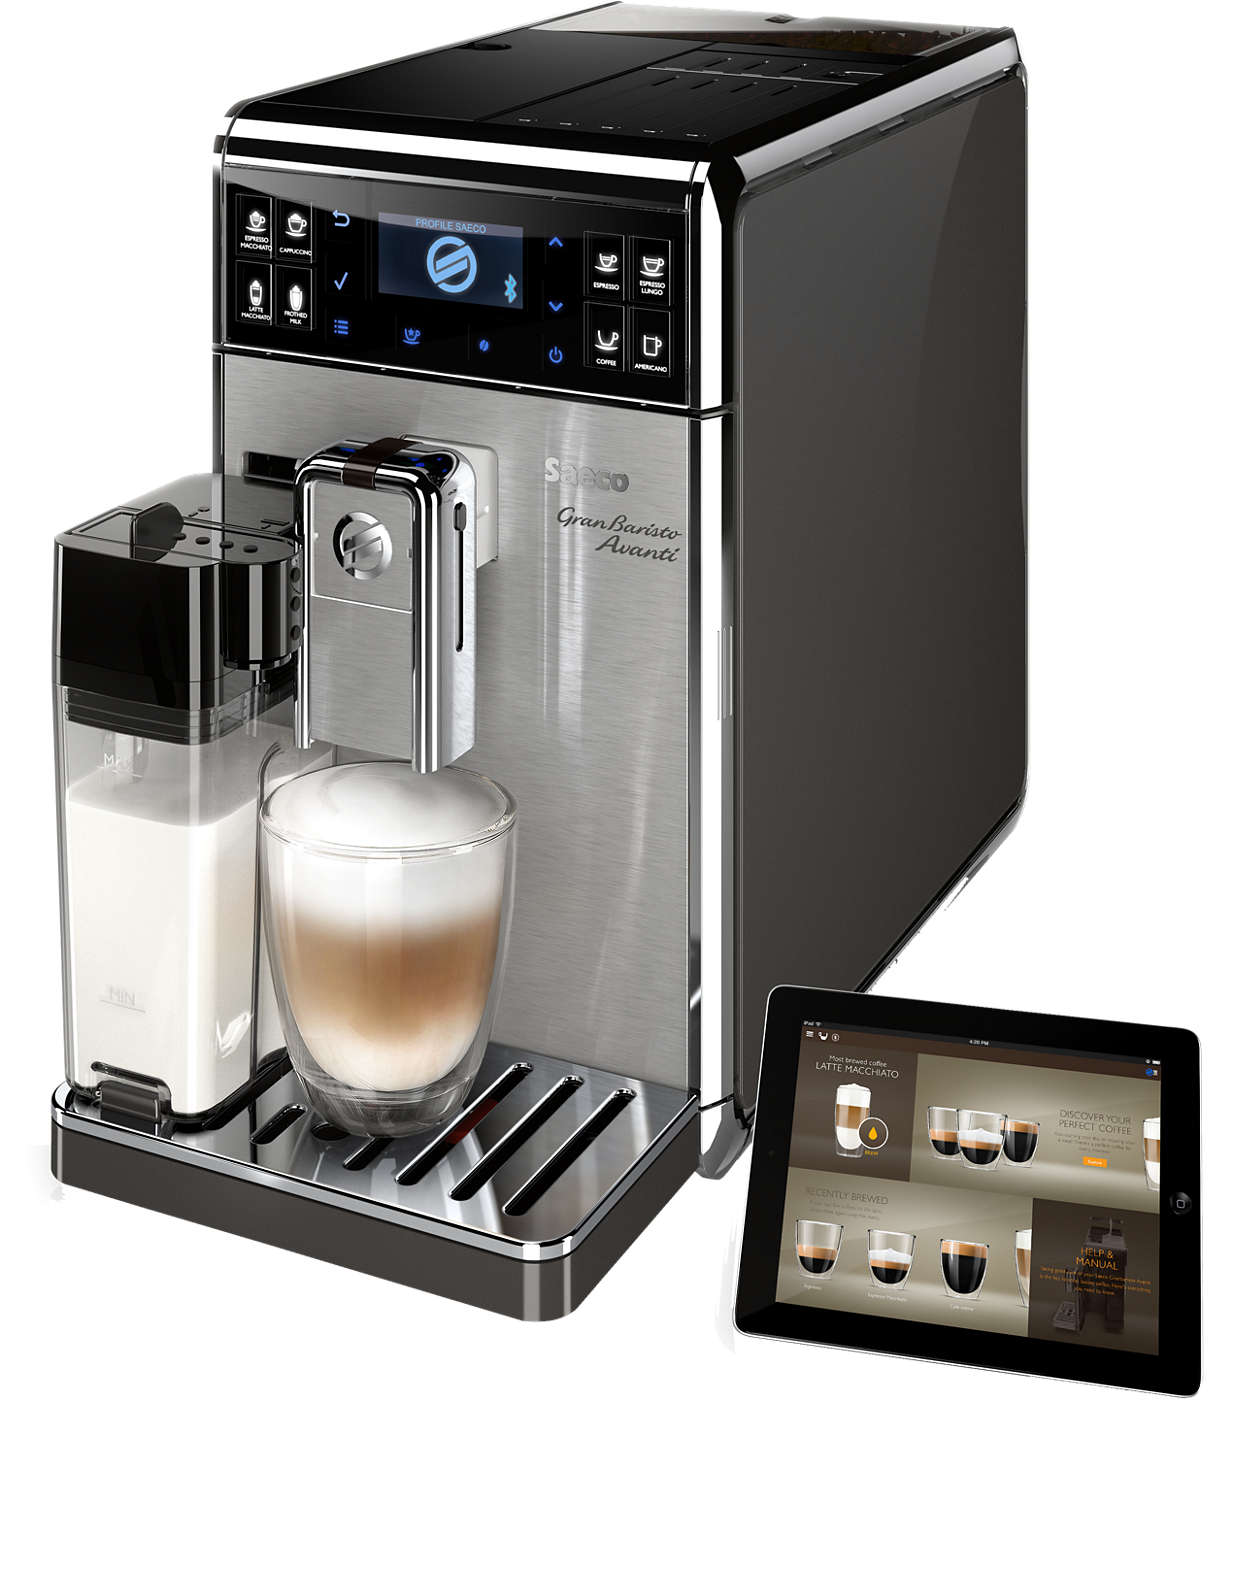 The most advanced at-home coffee experience